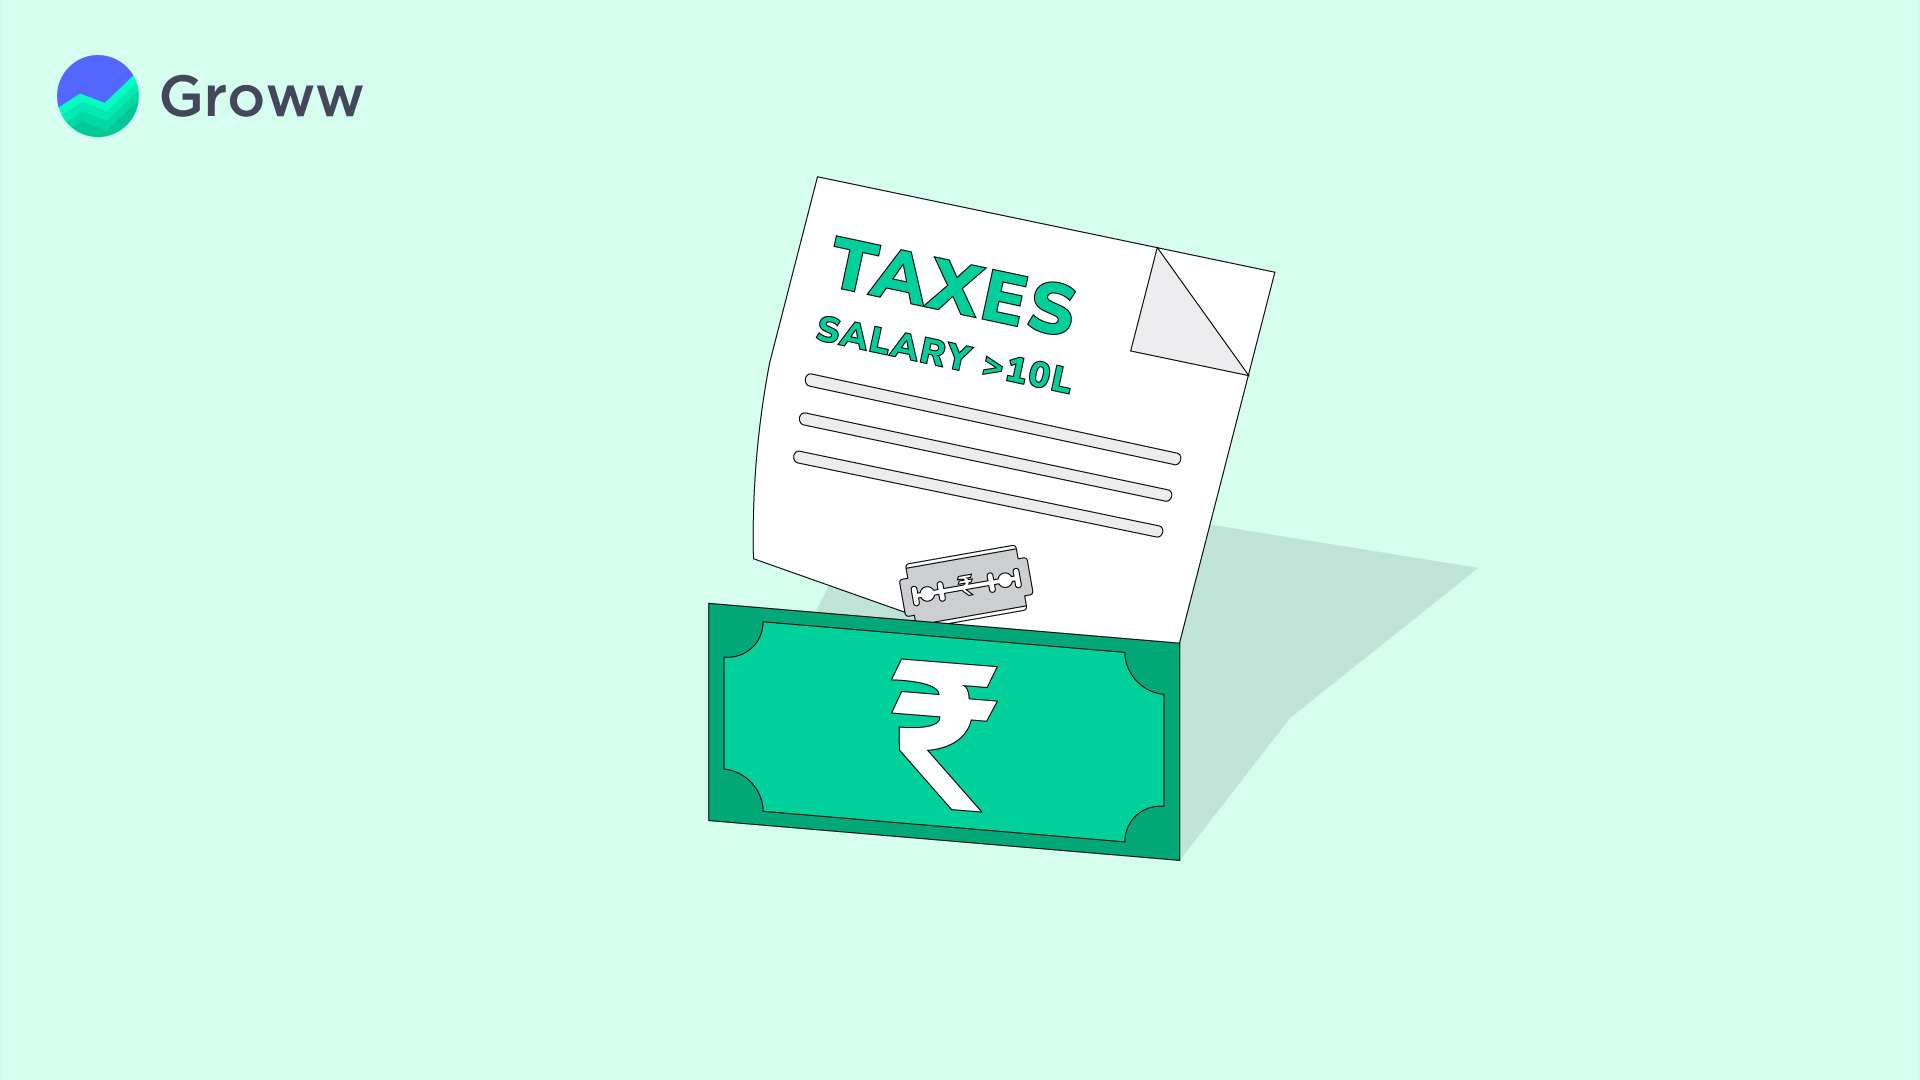 How to Save Tax for Salary above 10 Lakhs